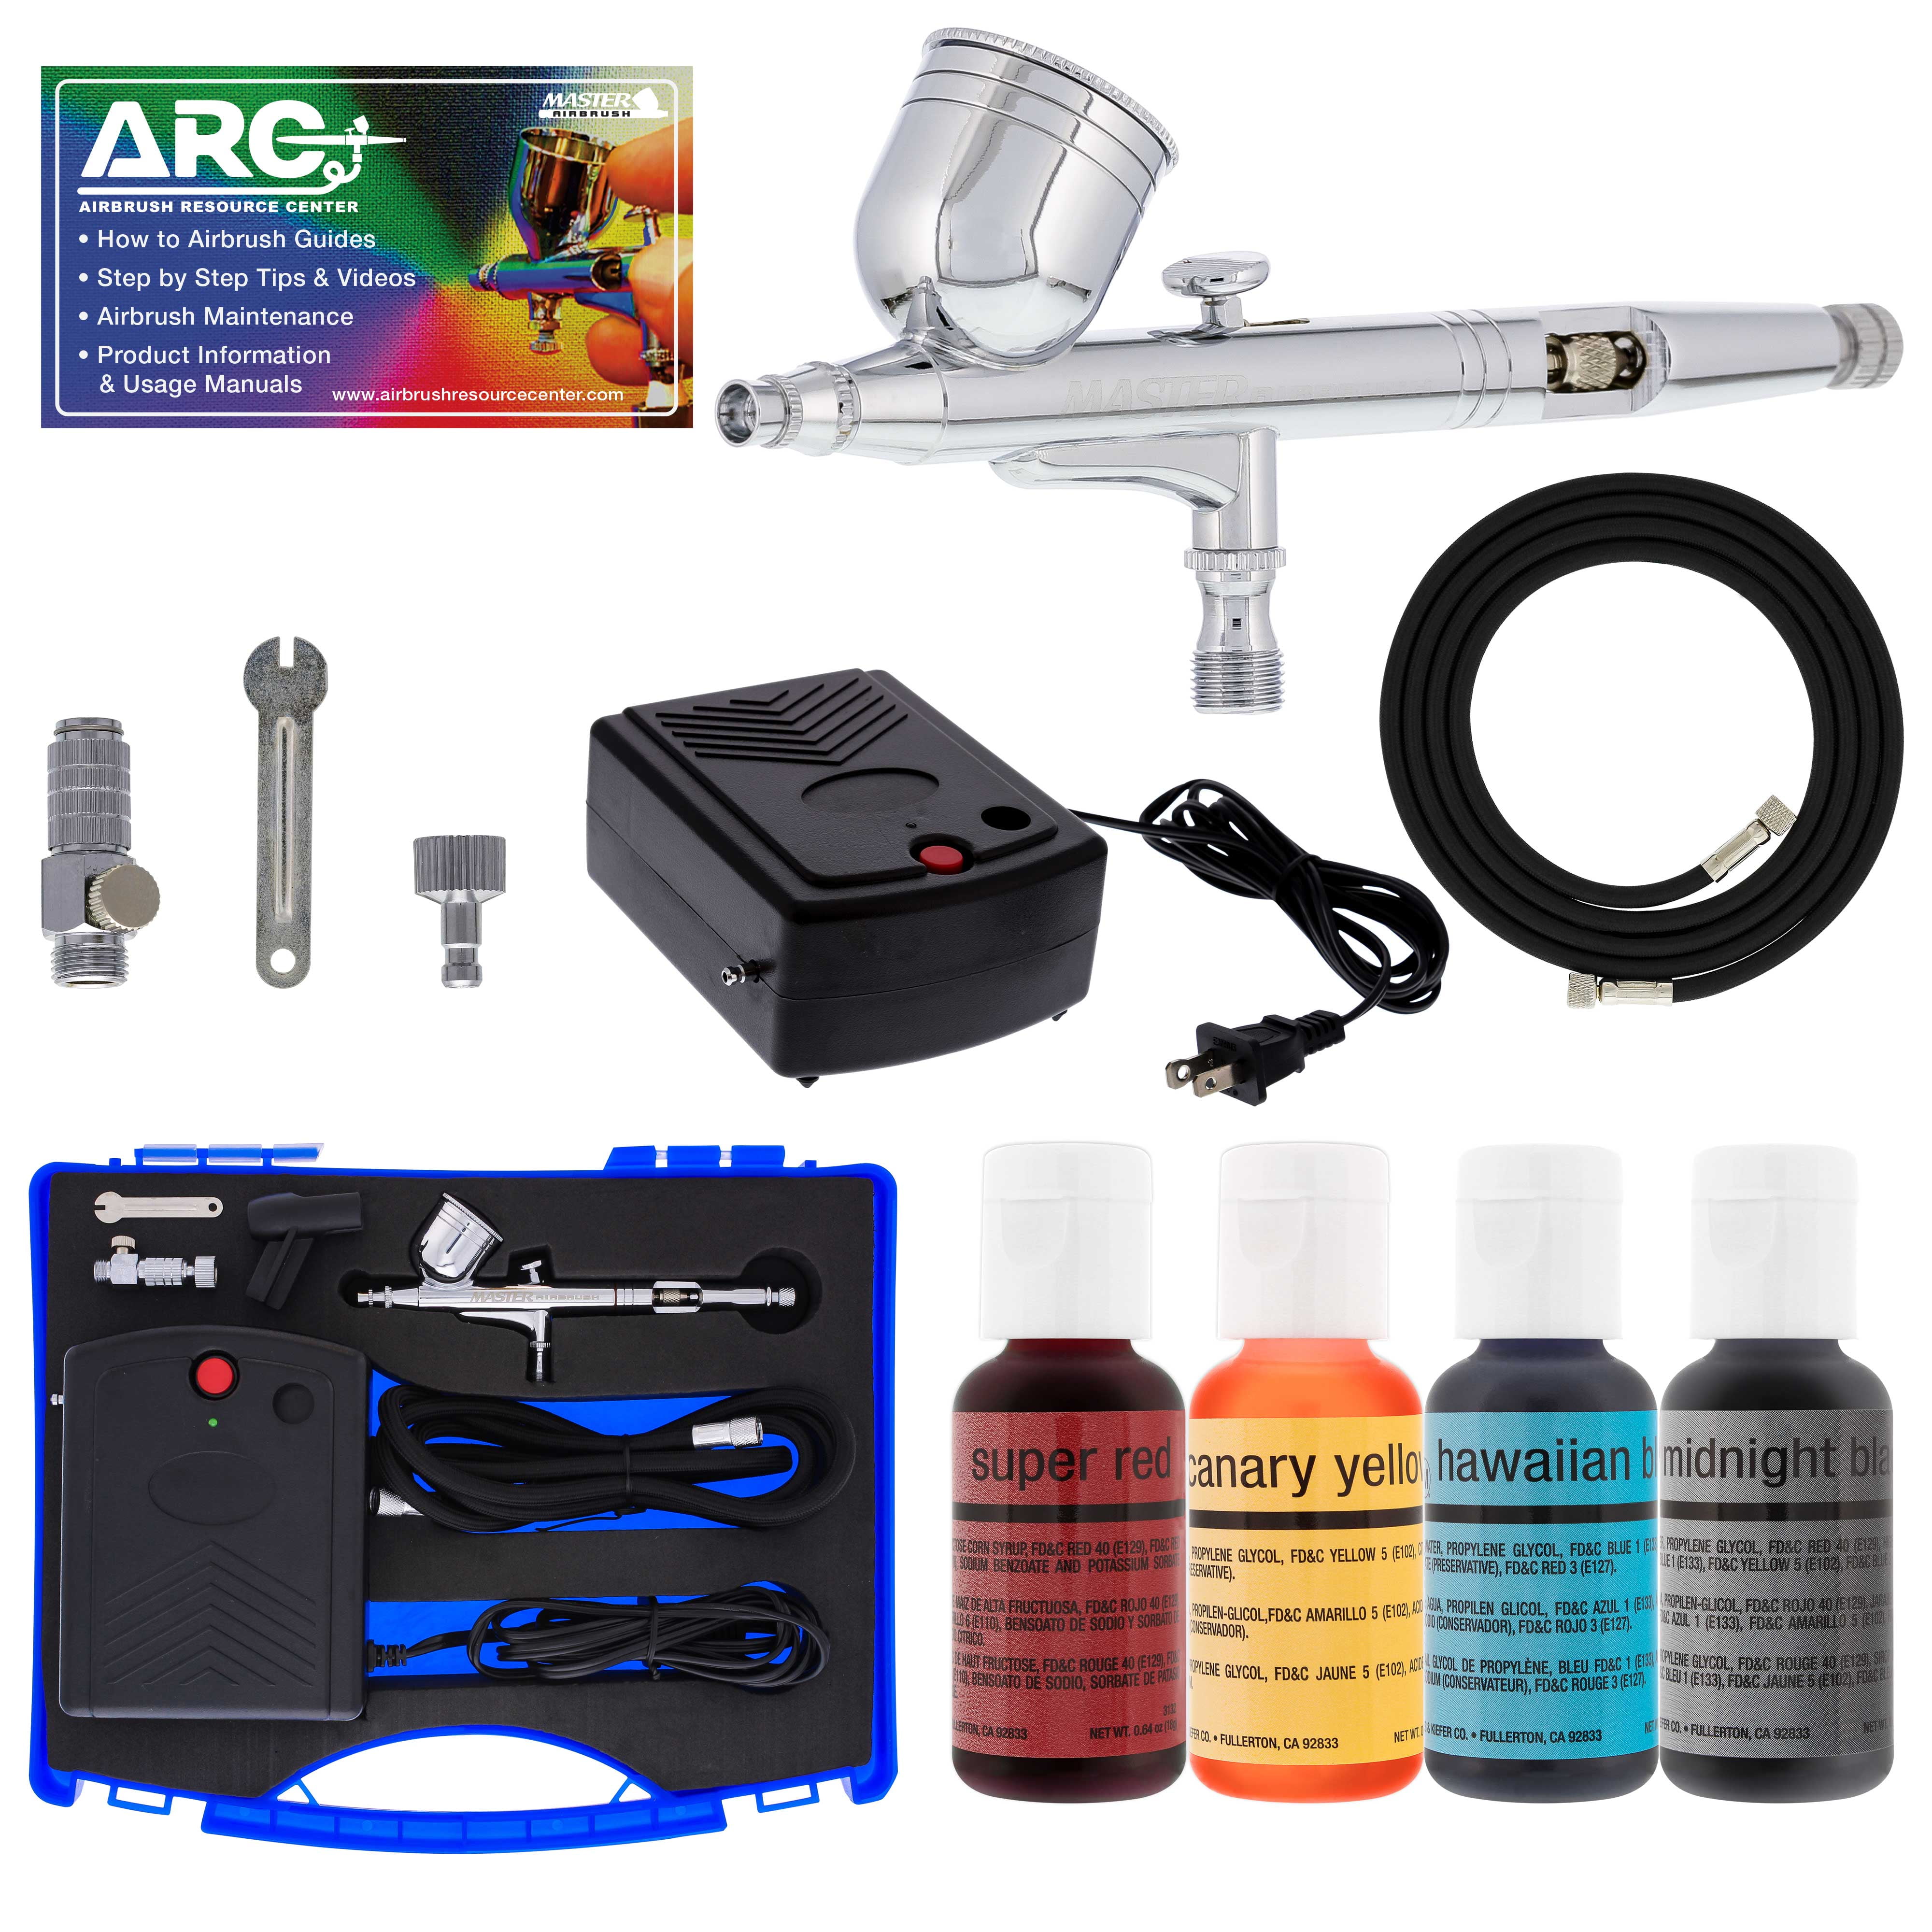 Master Airbrush Cool Runner II Dual Fan Air Storage Tank Compressor System Kit with A G22 Gravity Feed Airbrush Set with 0.3 mm